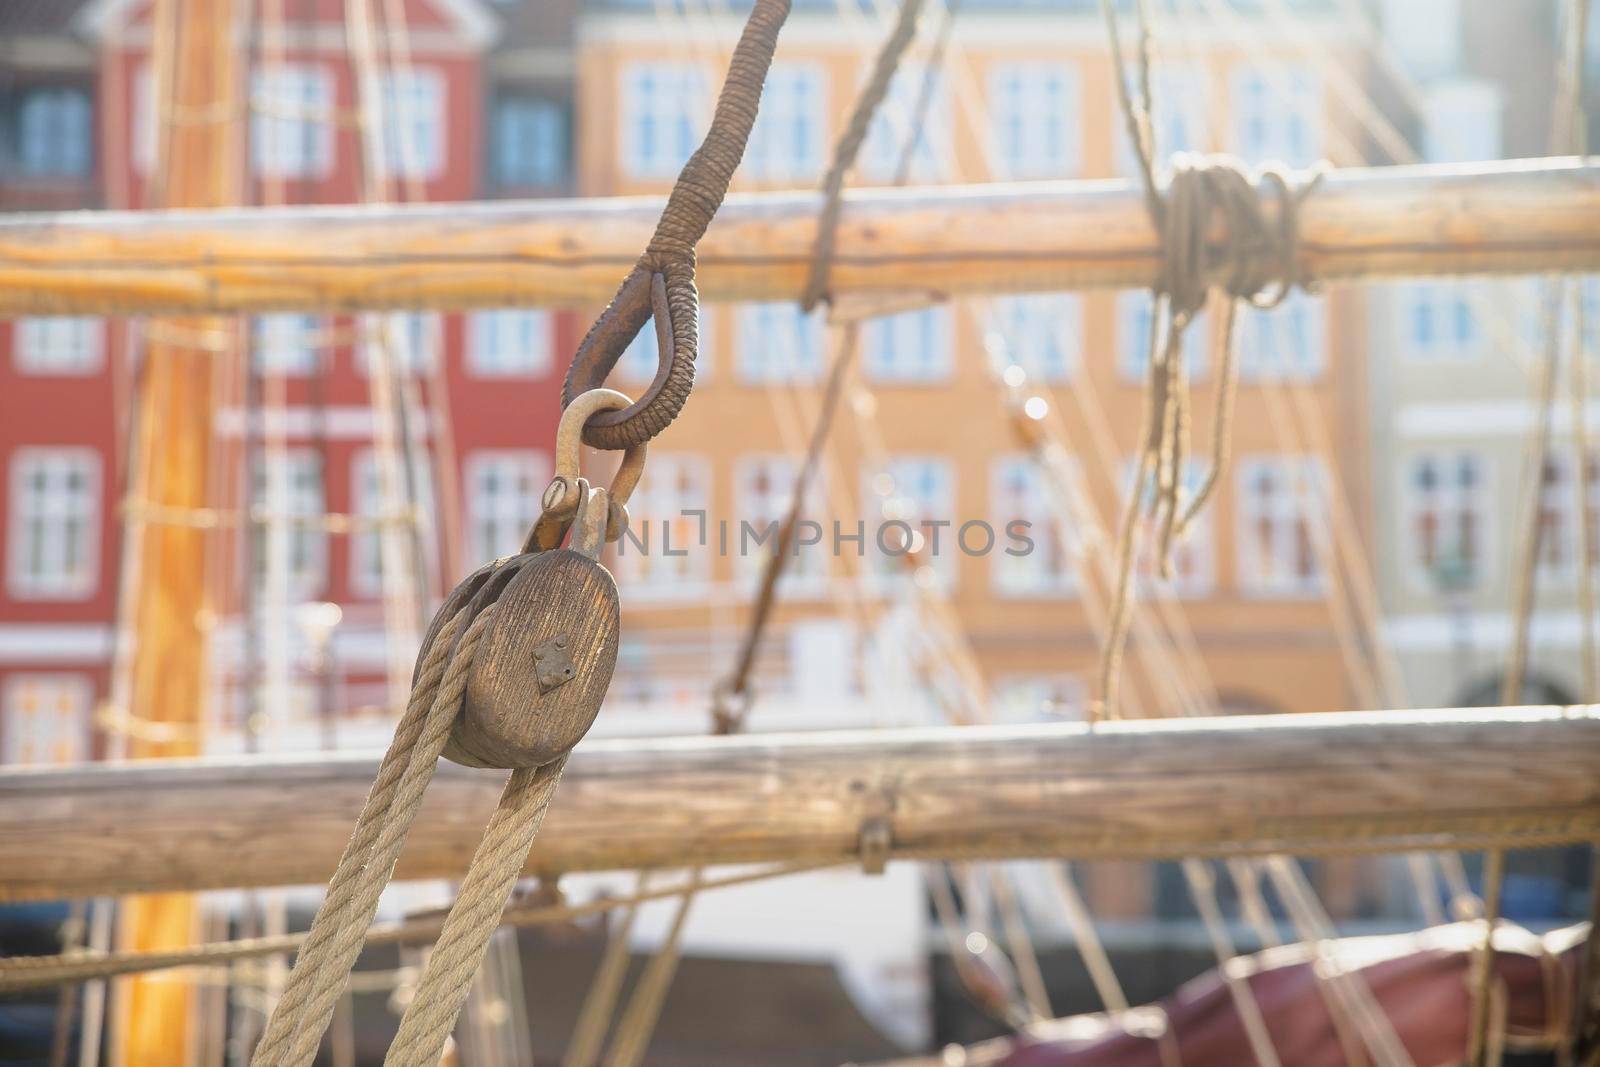 Rigging on an old sailing ship in Denmark.